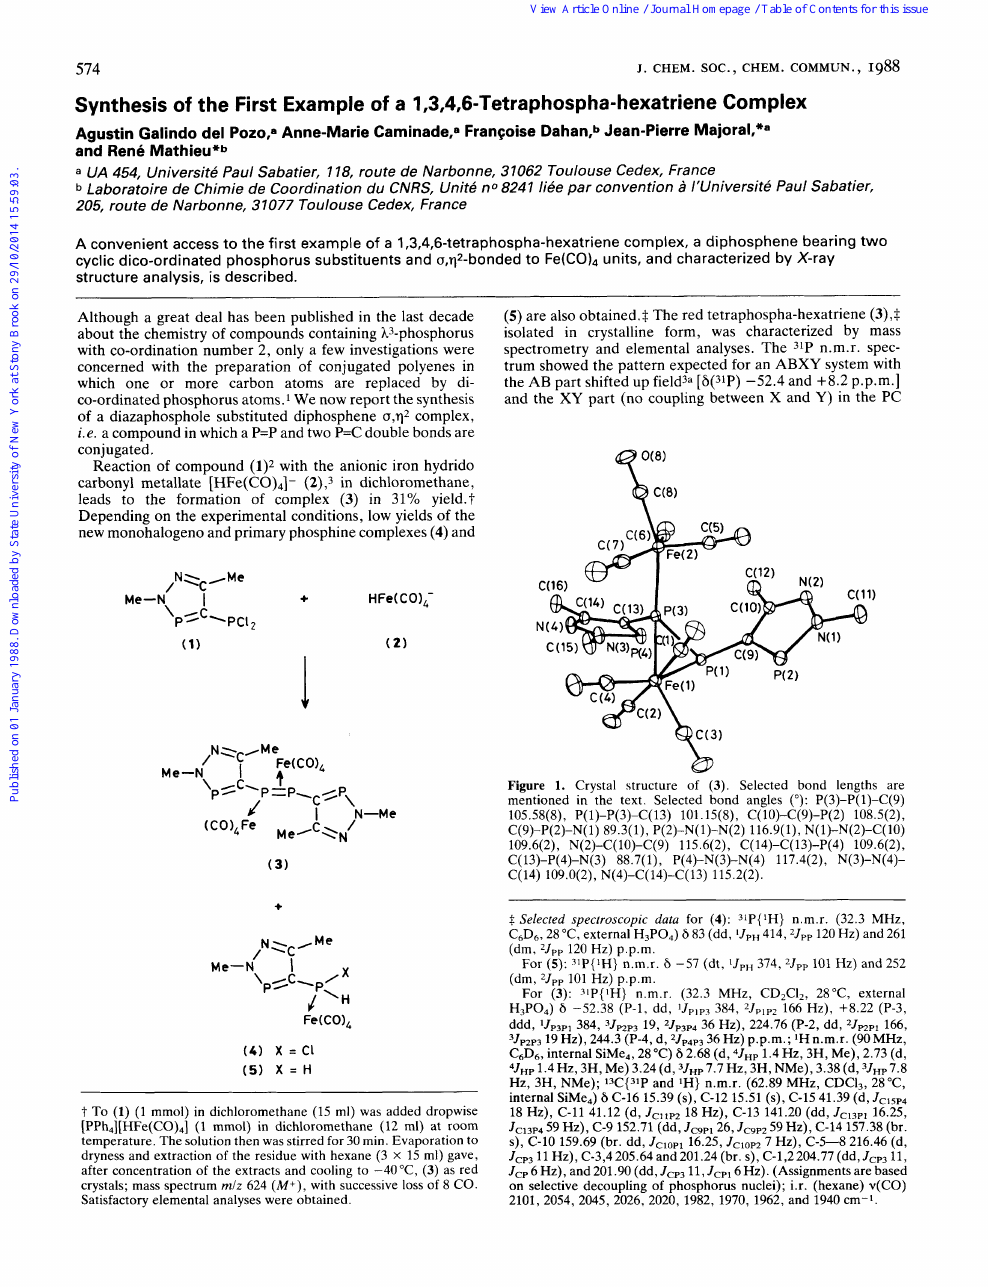 Synthesis Of The First Example Of A 1 3 4 6 Tetraphospha Hexatriene Complex Topic Of Research Paper In Chemical Sciences Download Scholarly Article Pdf And Read For Free On Cyberleninka Open Science Hub